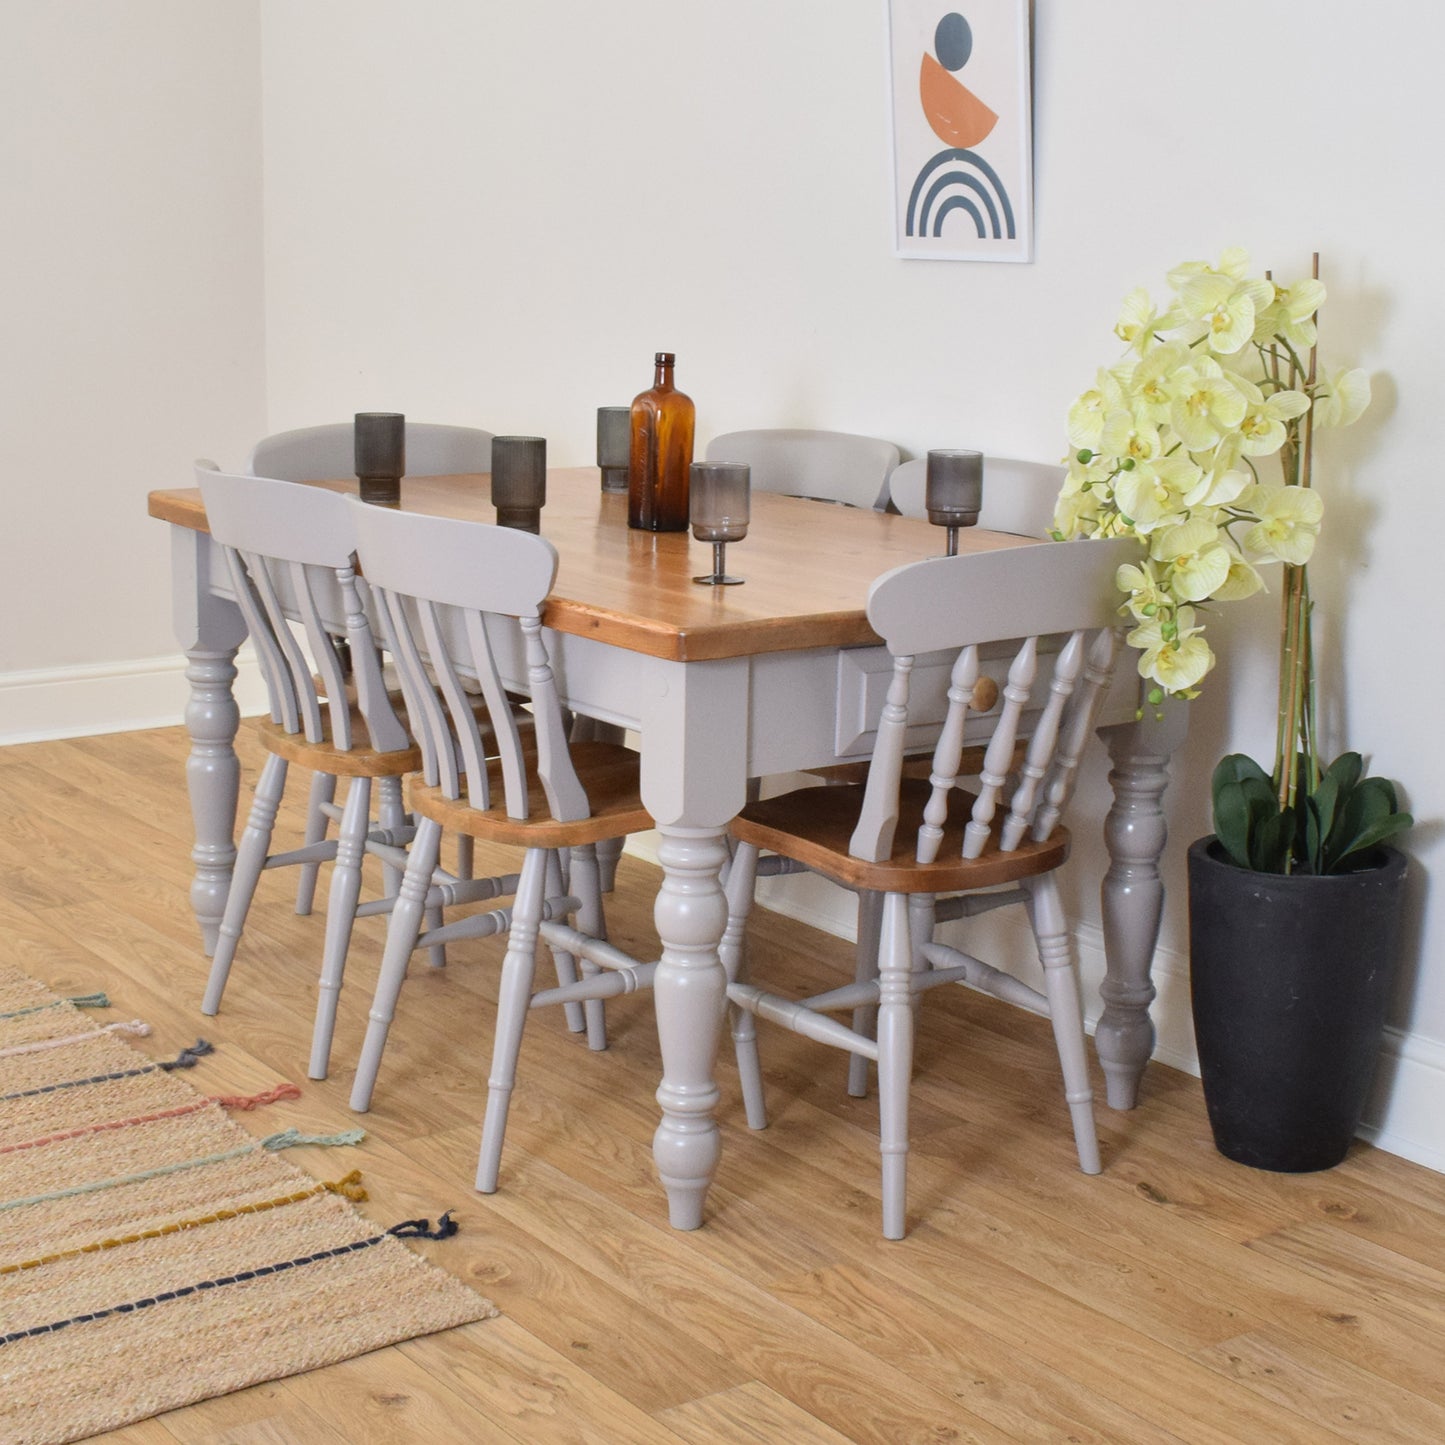 Painted Pine Table & Six Chairs